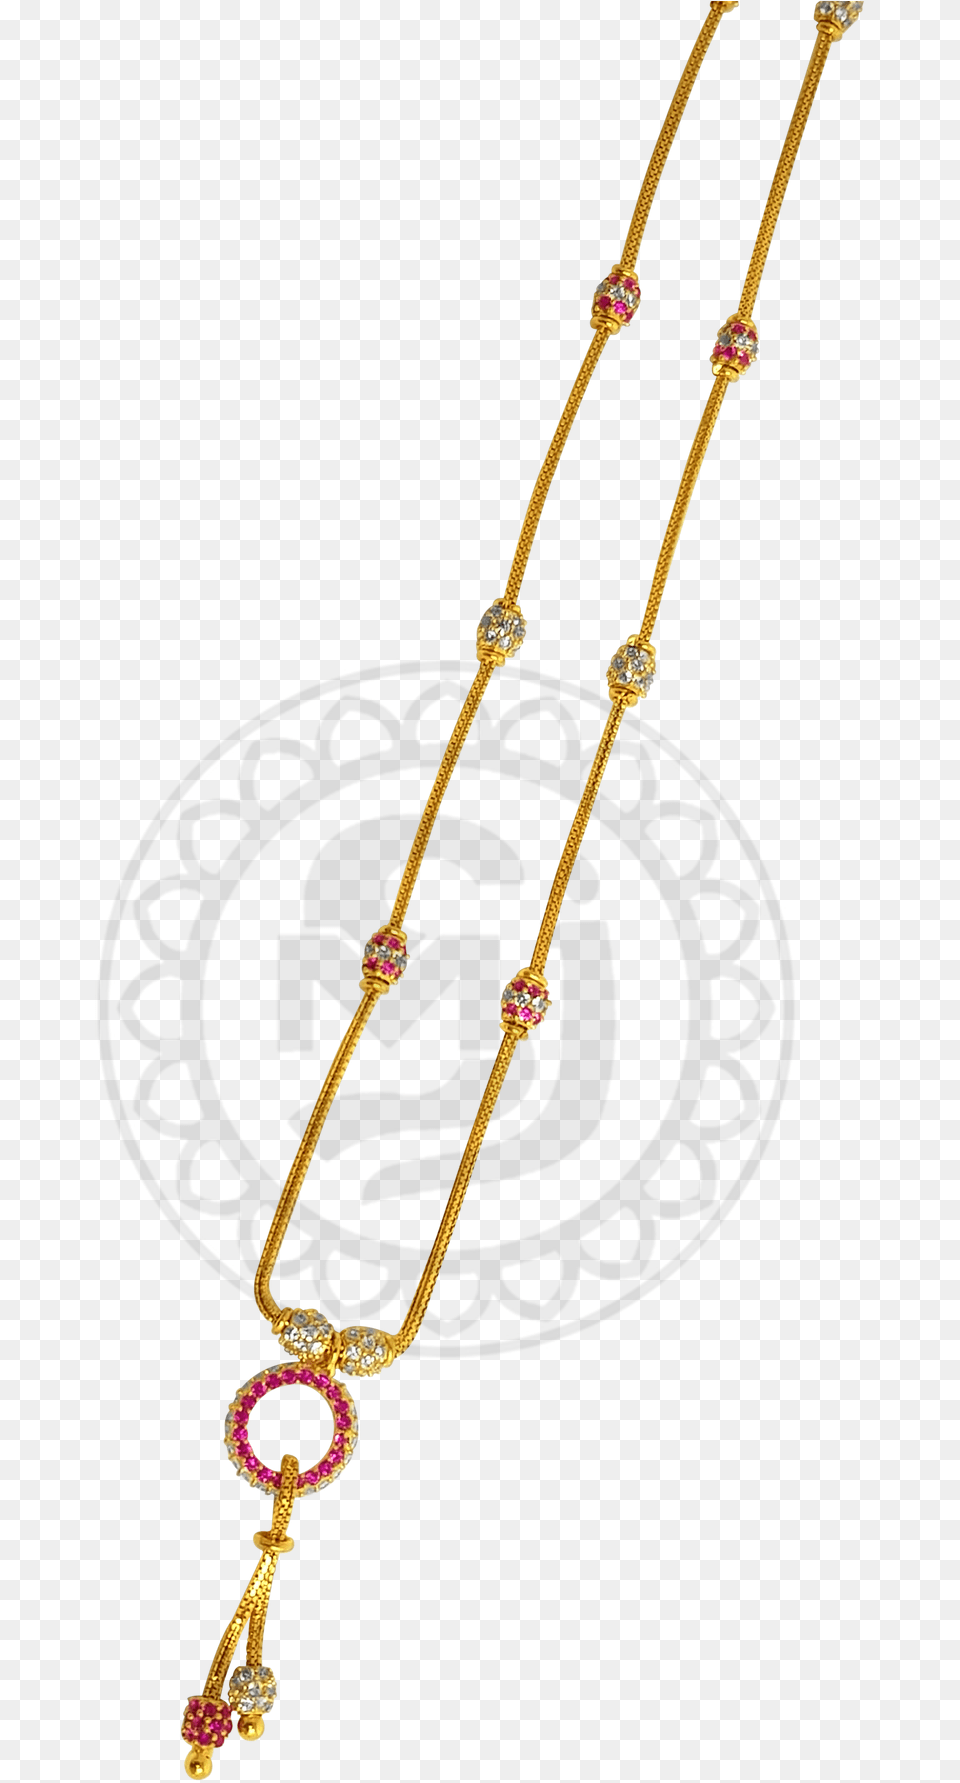 Chain Illustration, Accessories, Jewelry, Necklace, Bracelet Png